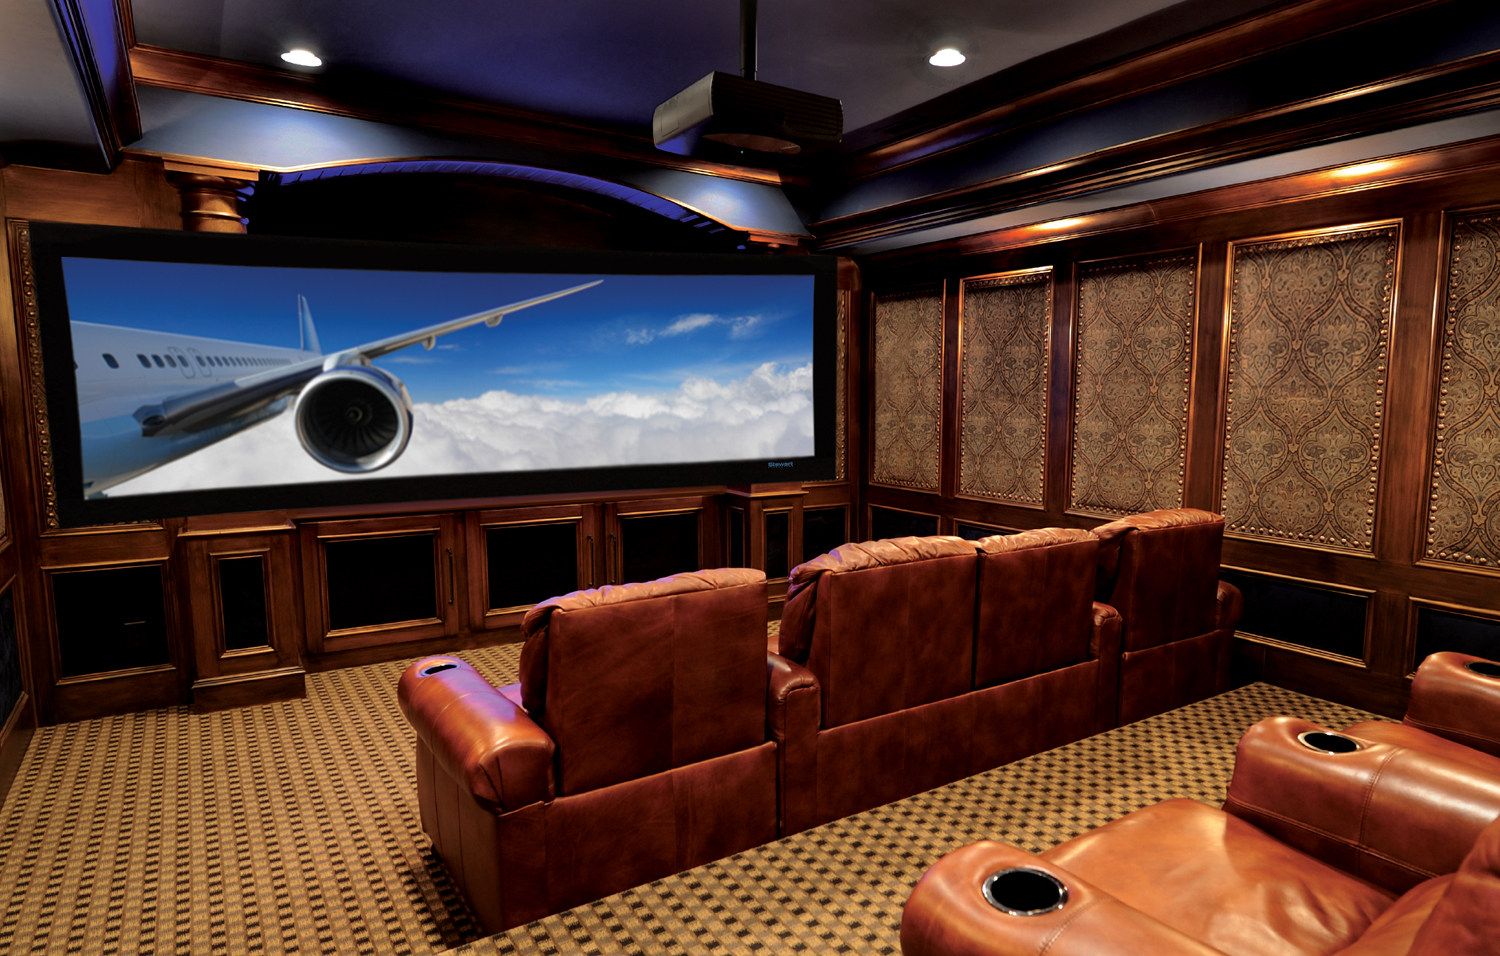 Home Theater Design – 10 ways to set up the general nature of excitement